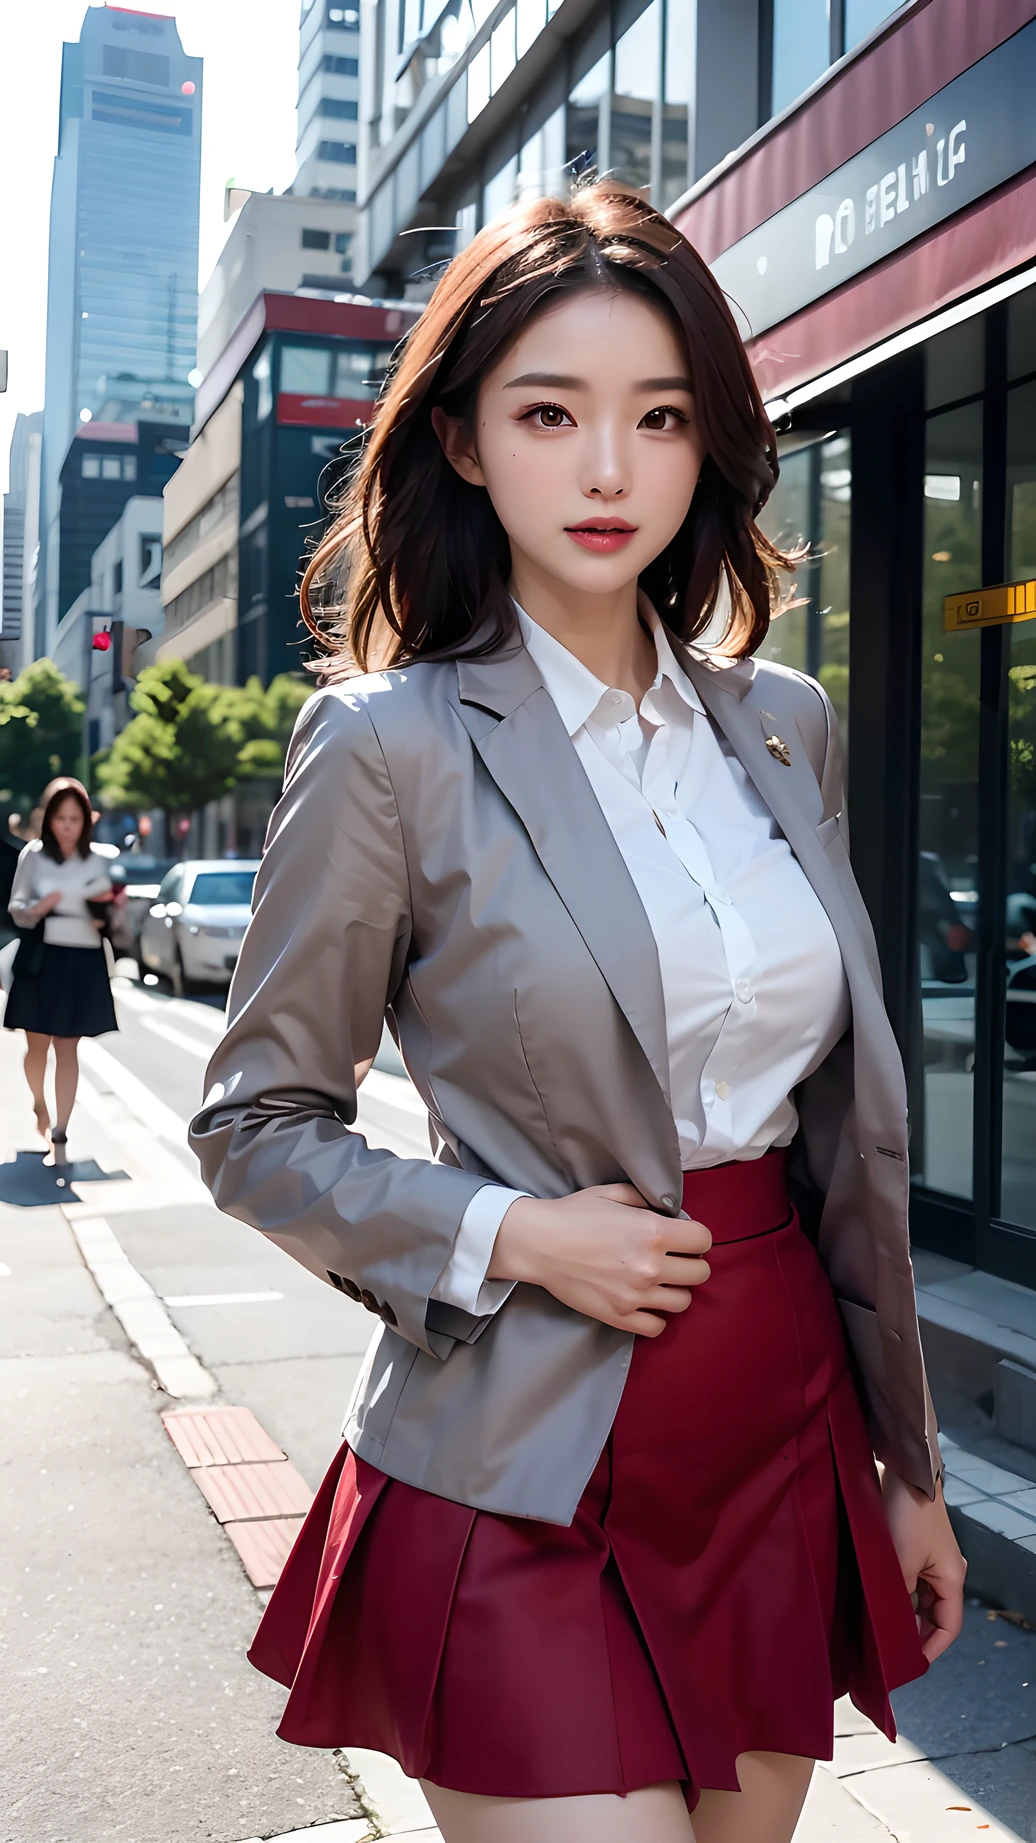 "A captivating moment captured in the midst of a sun-kissed urban landscape during the sunset hours, featuring a stunning Korean news anchor wearing an elegant skirt suit and chic jacket, gracefully turning around."
BREAK,
The enchanting caster, dressed in her fashionable skirt suit and impeccably tailored jacket, exudes confidence and sophistication as she strolls through the office district. Her flowing hair dances in the gentle breeze, adding to the allure of the scene."
BREAK, 
"In the background, the city's towering skyscrapers are bathed in the warm, golden glow of the setting sun, casting long shadows that stretch across the bustling streets, creating a mesmerizing backdrop for this captivating moment."